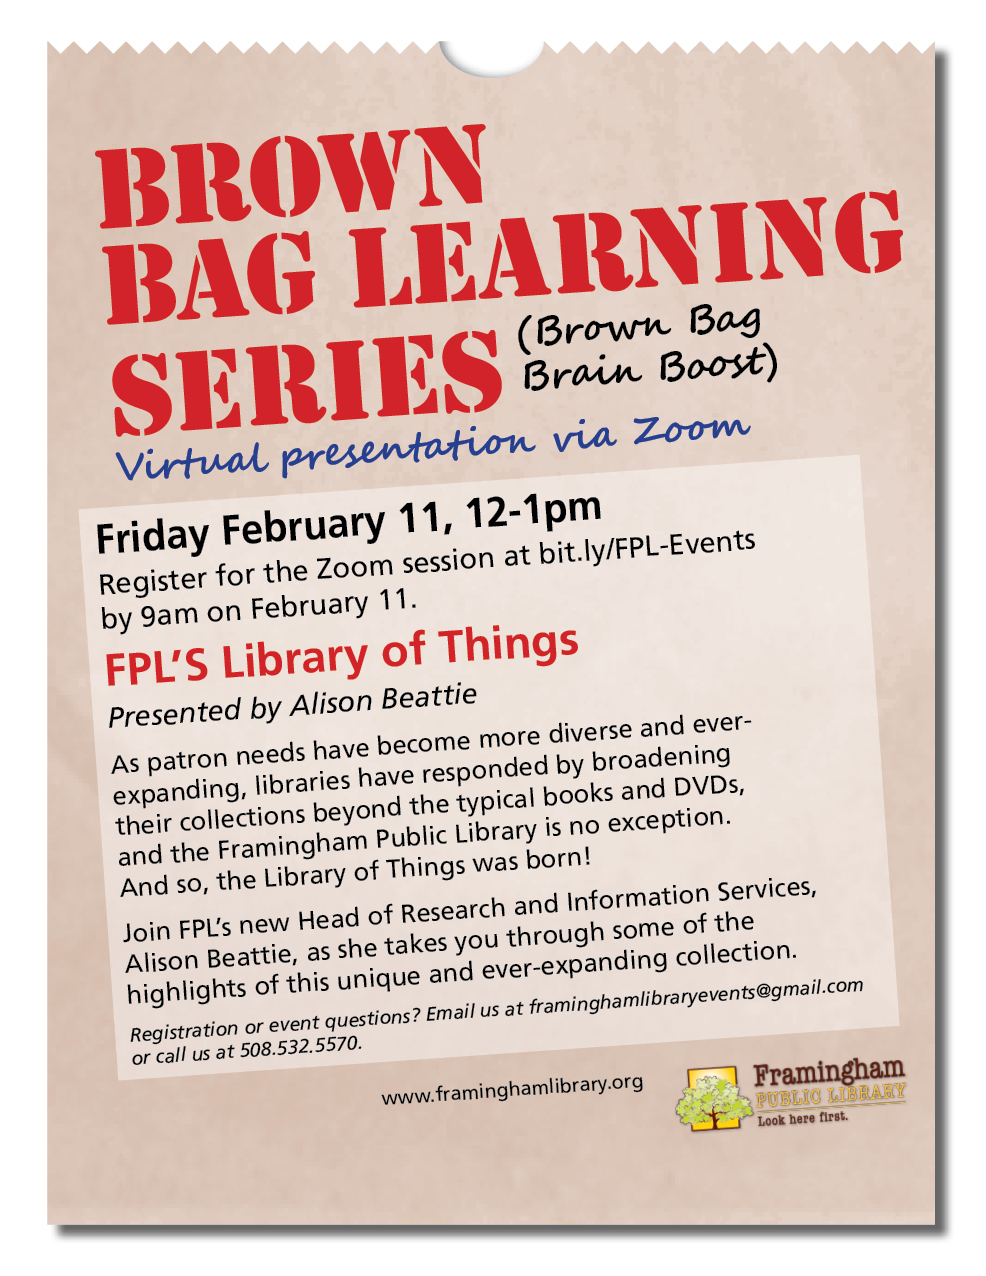 Brown Bag Learning Series: FPL’S Library of Things thumbnail Photo